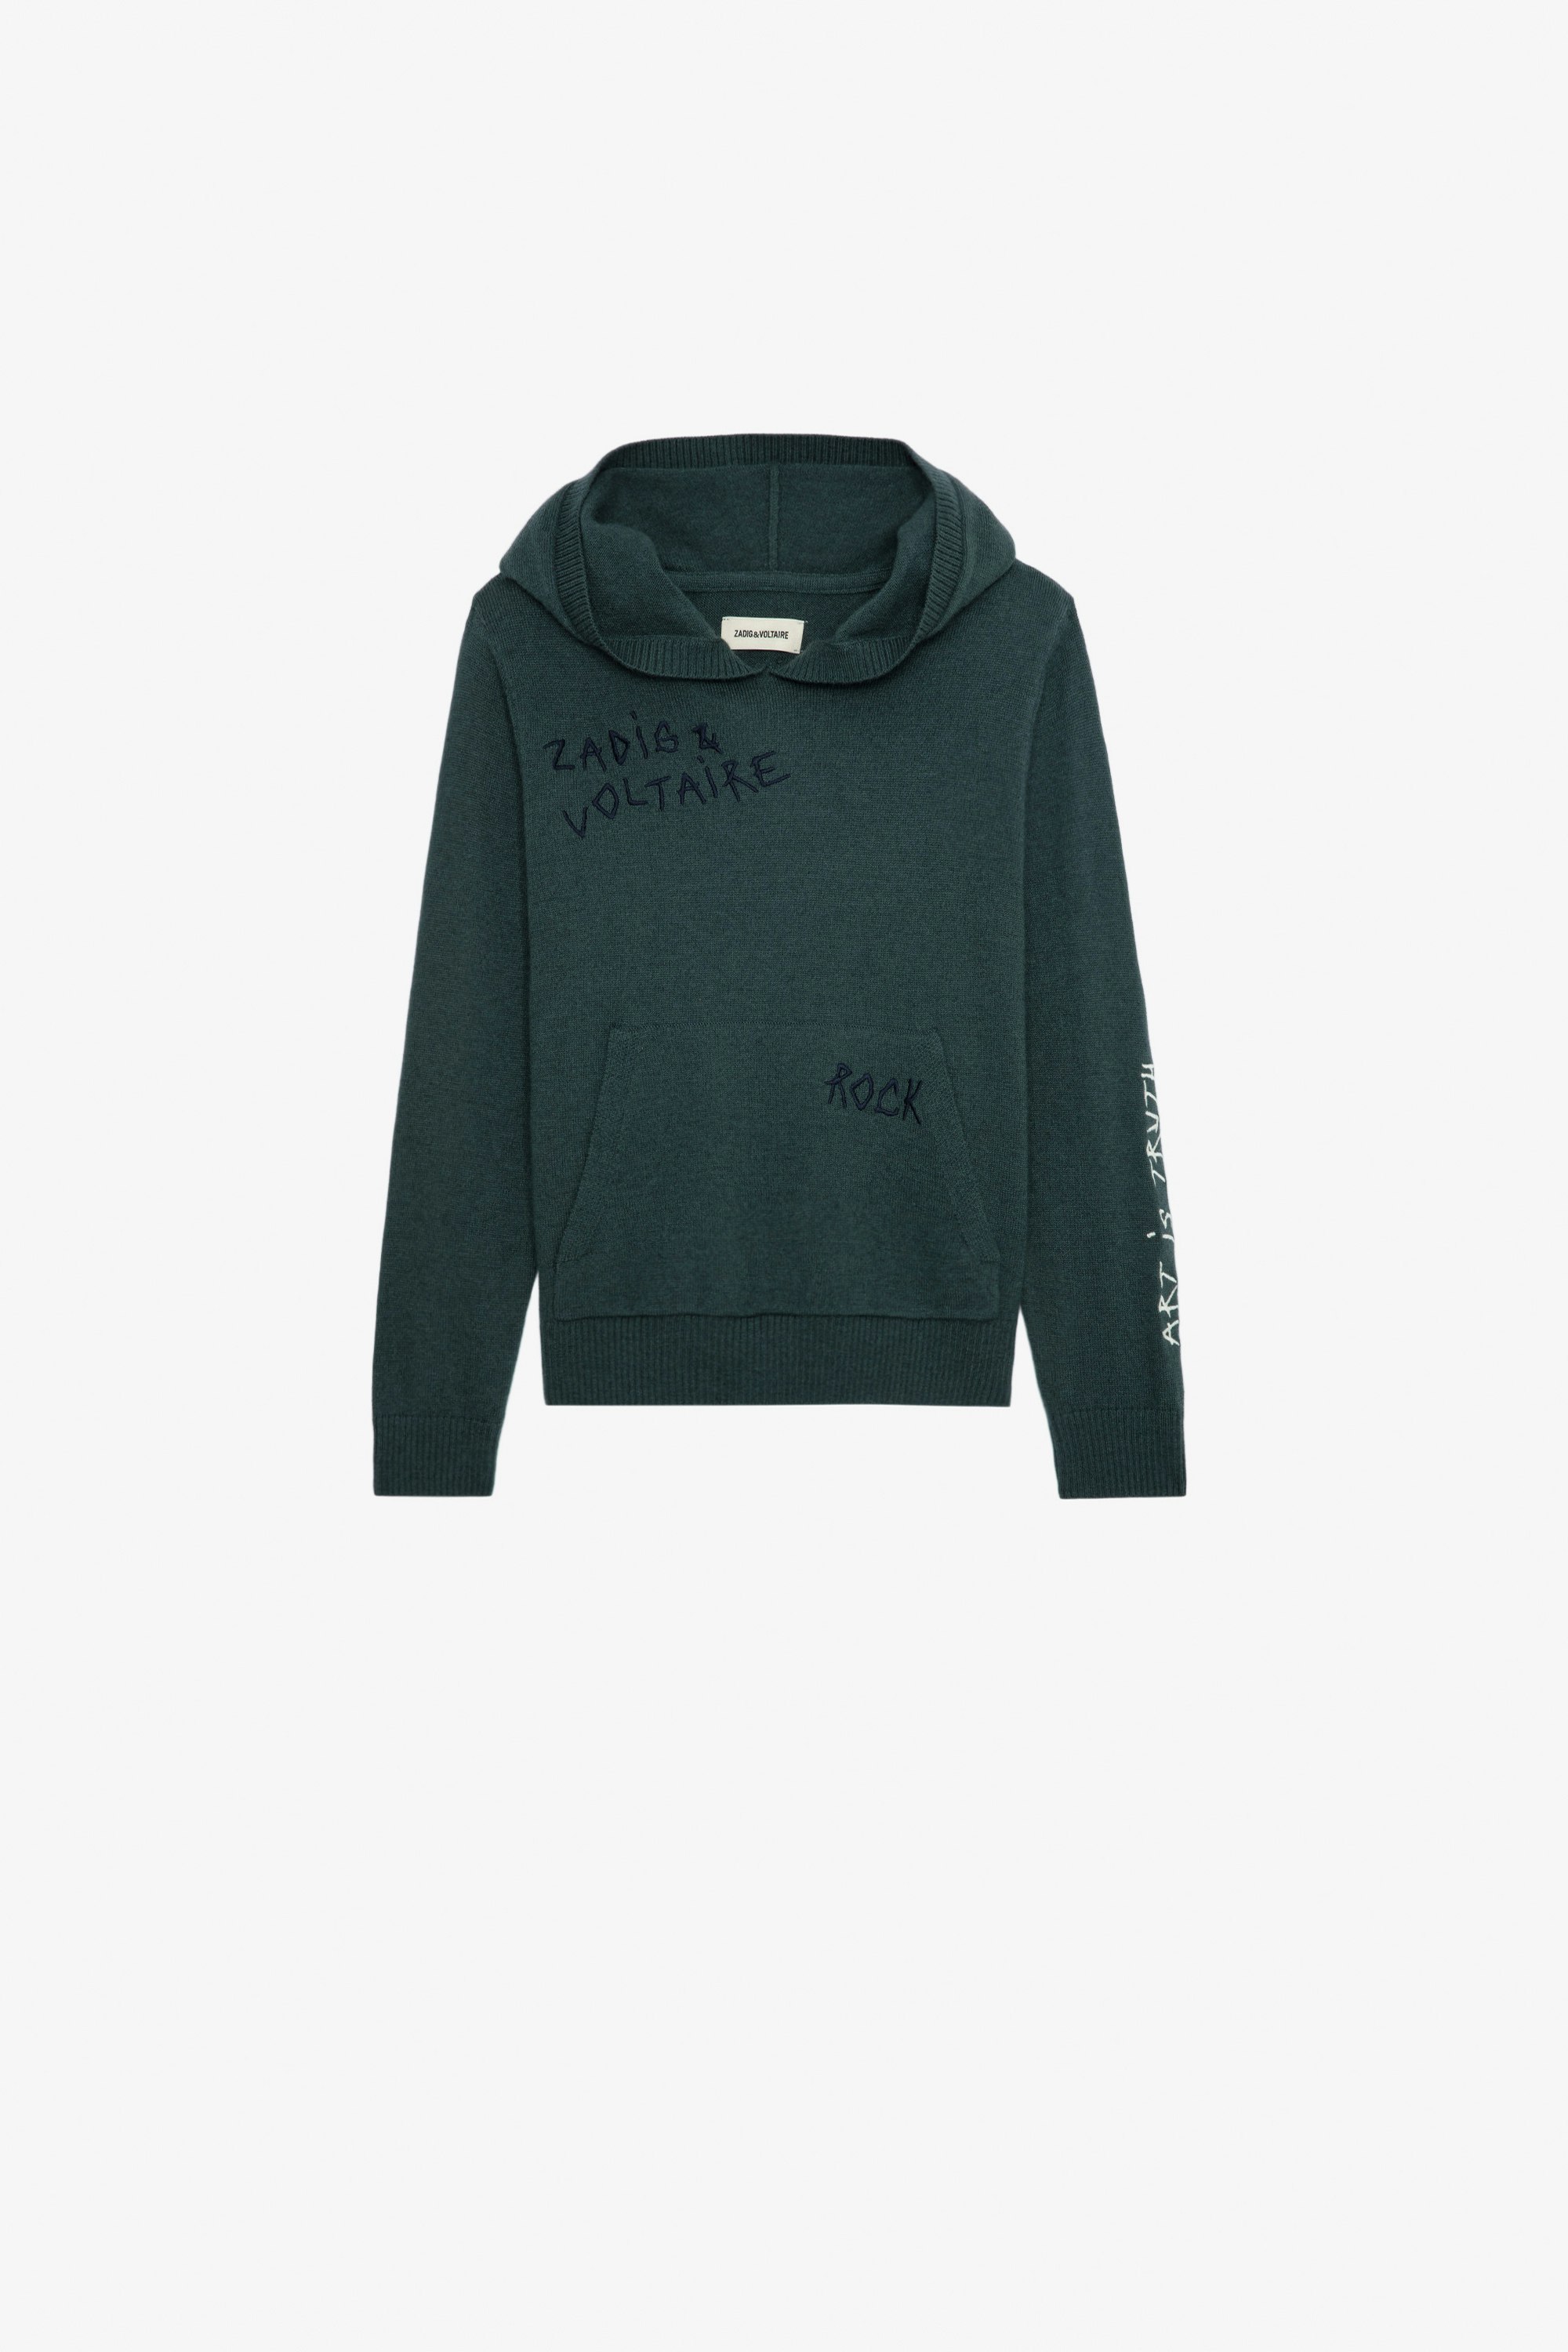 Andy Boys’ Sweatshirt - Boys’ dark green knit hoodie with illustrations and embroidery.